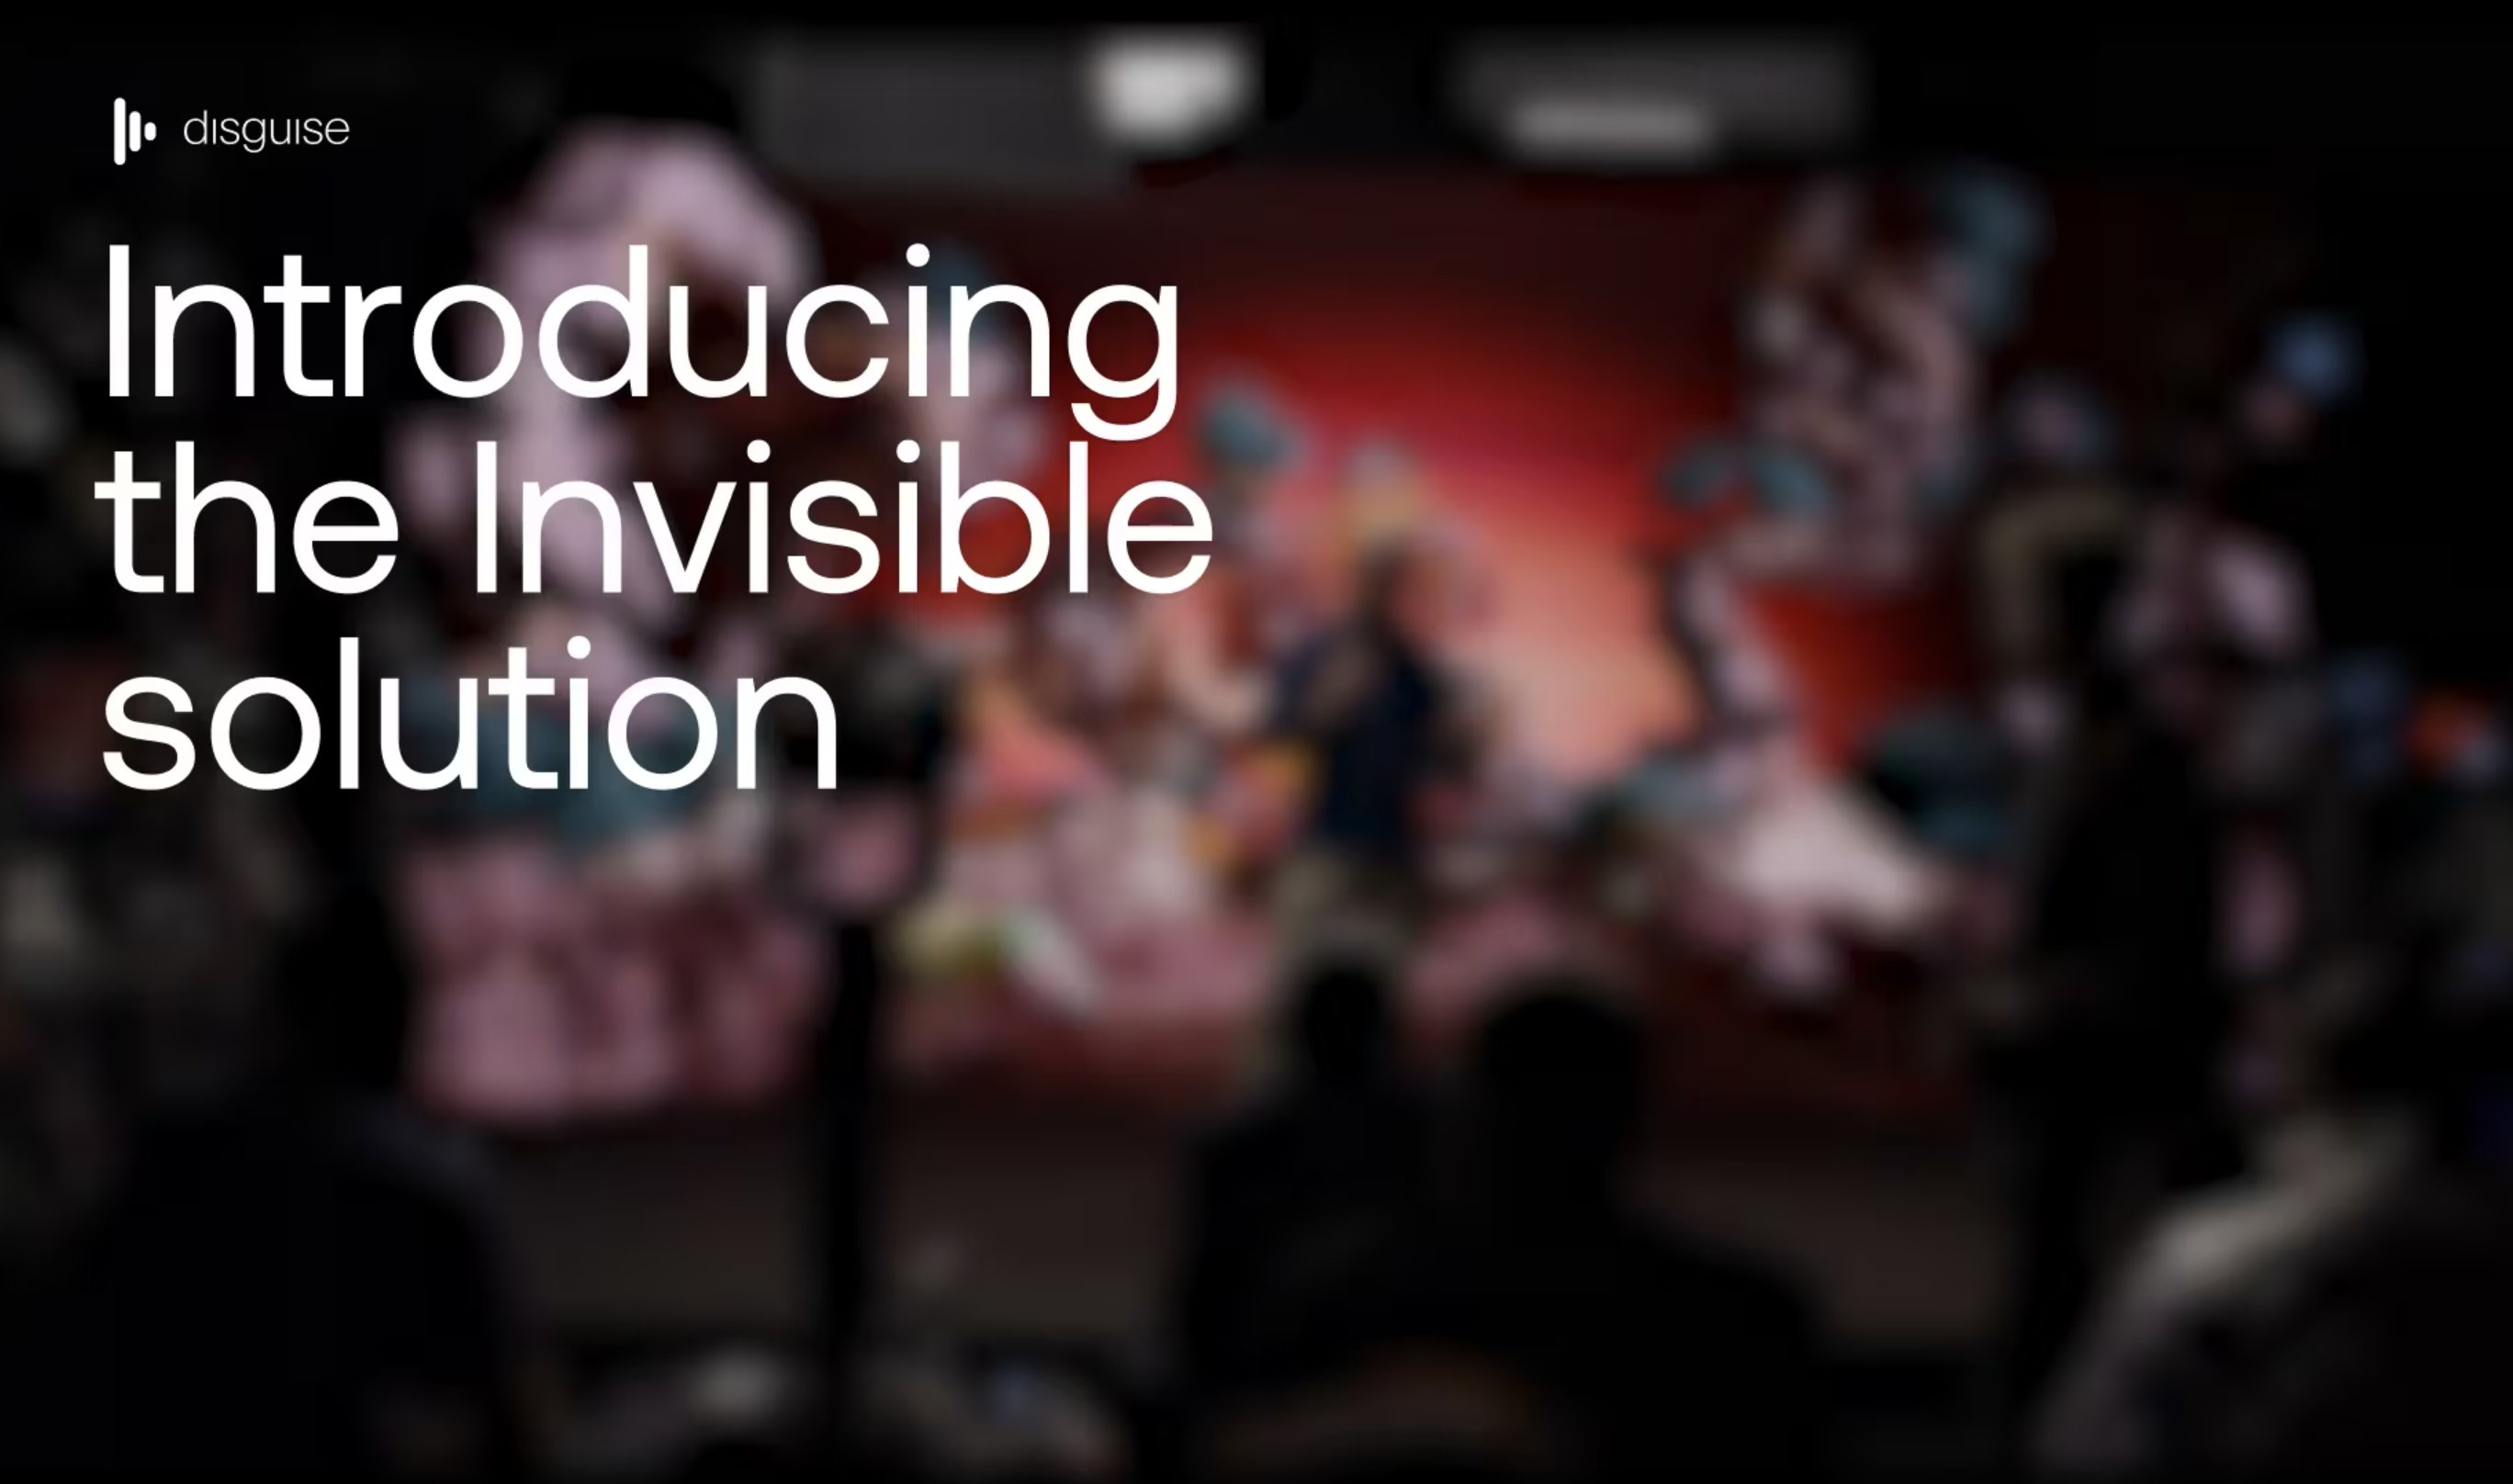 A still image of three people on an LED stage, with the title 'Introducing the Invisible Solution'